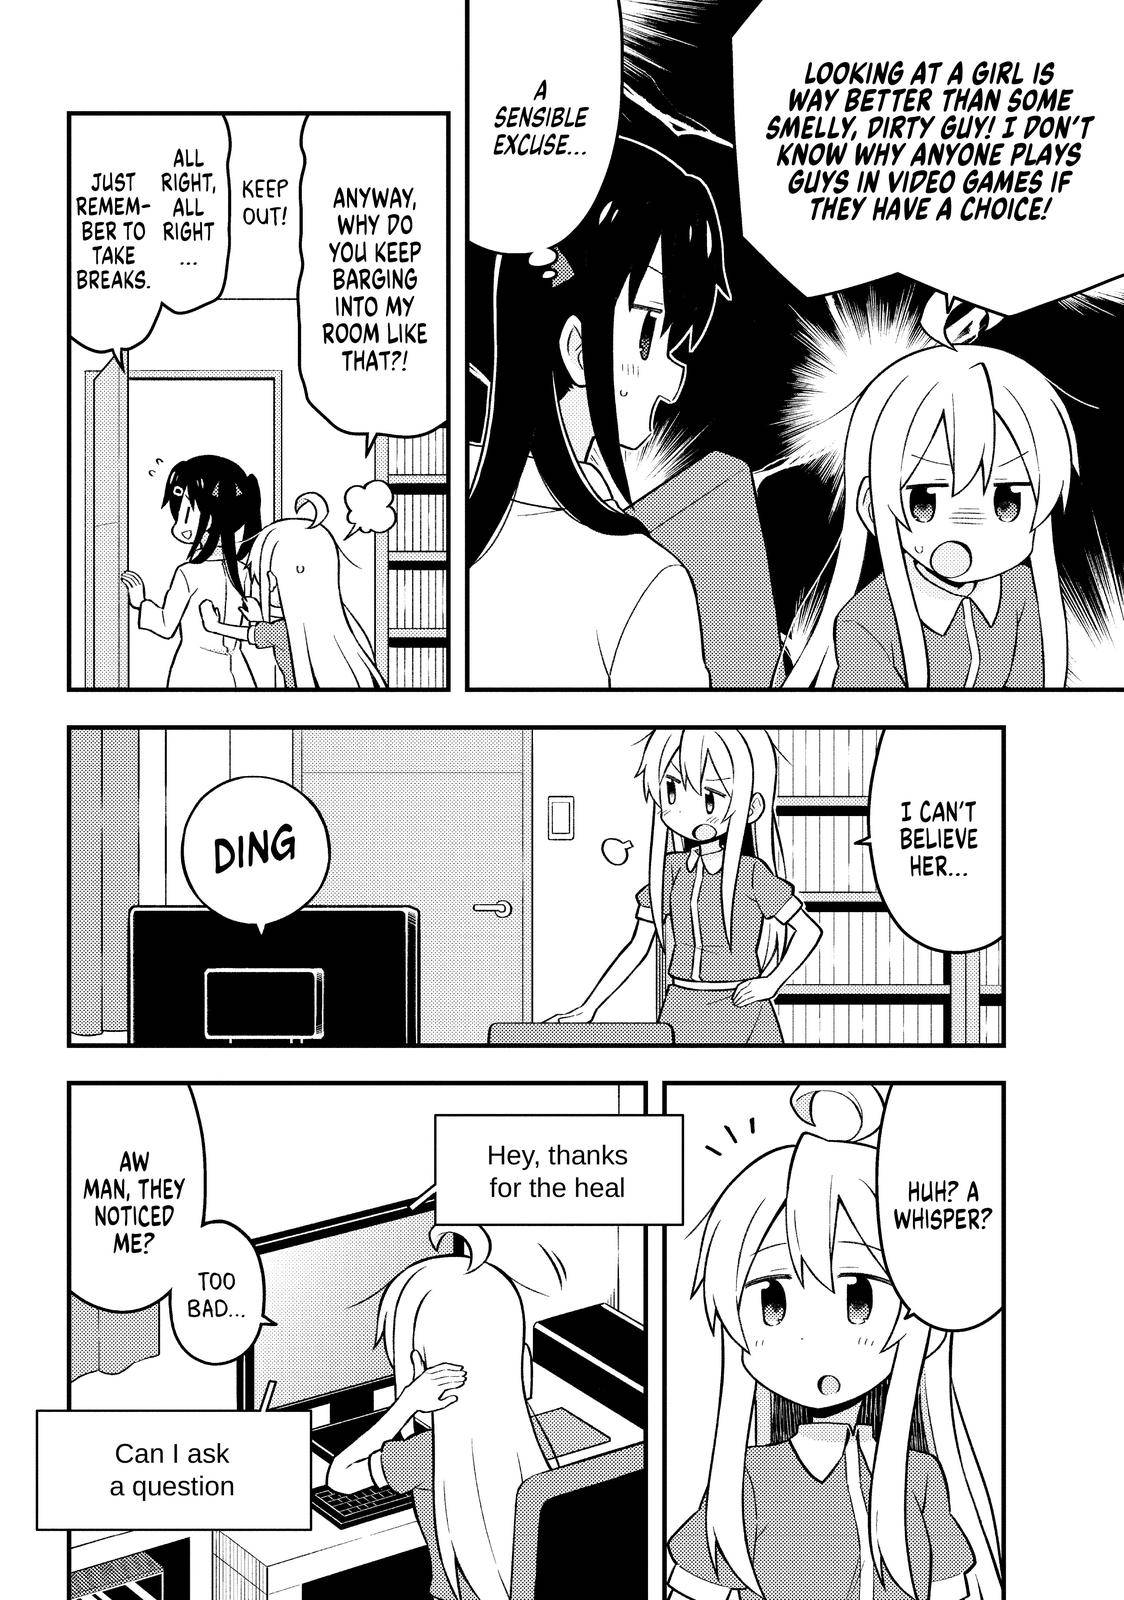 ONIMAI - I'm Now Your Sister! - chapter 4 - #4